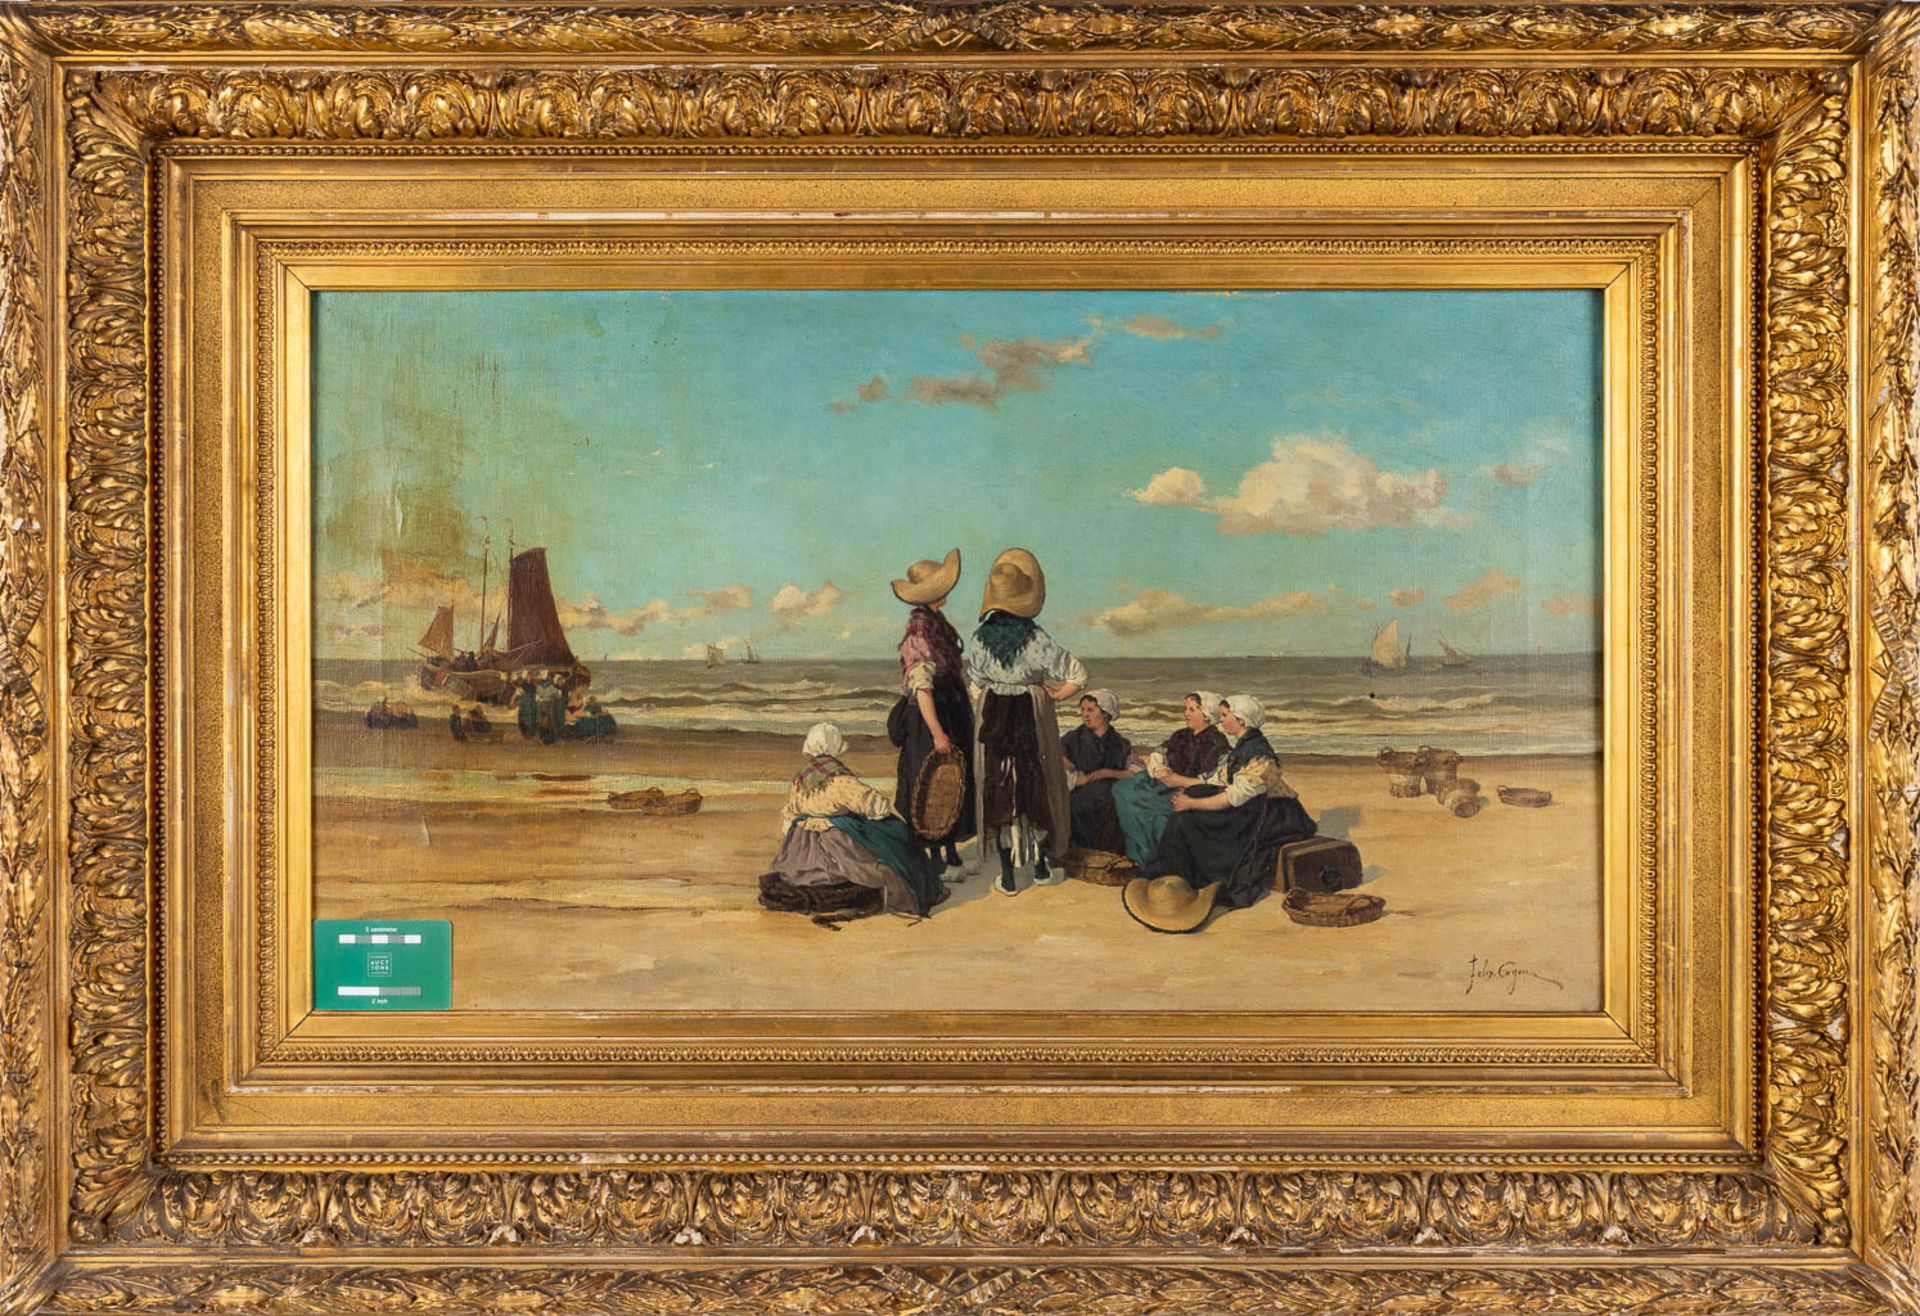 Félix COGEN (1838-1907) 'Fisherman's wife on the beach' oil on canvas. (W:80 x H:45 cm) - Image 2 of 9